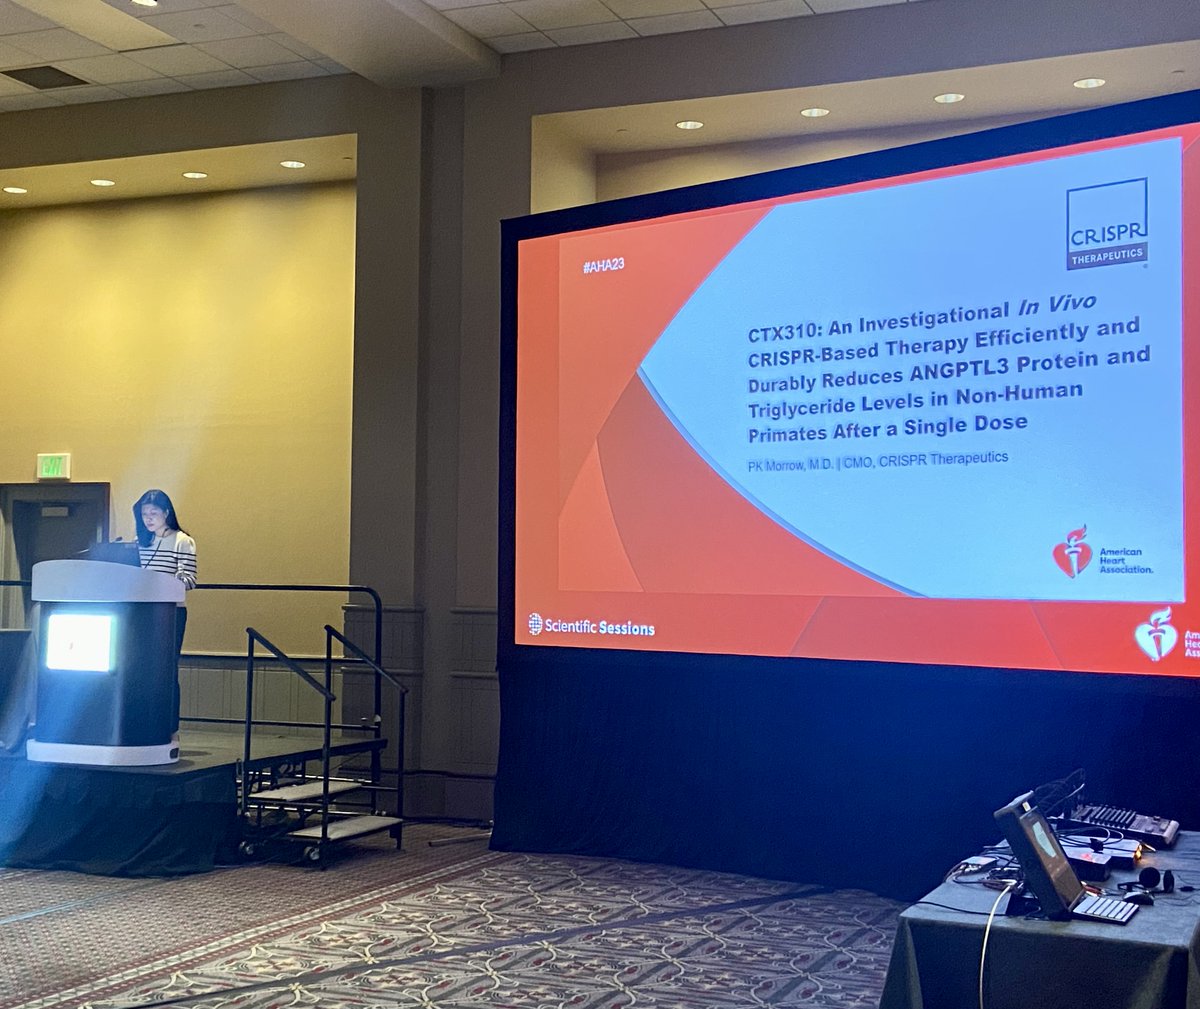 It was an exciting day as Dr. PK Morrow, our Chief Medical Officer, presented preclinical data on our investigational programs for the treatment of cardiovascular disease in two oral sessions at the @American_Heart Scientific Sessions. Learn more: bit.ly/47oCkLX #AHA23